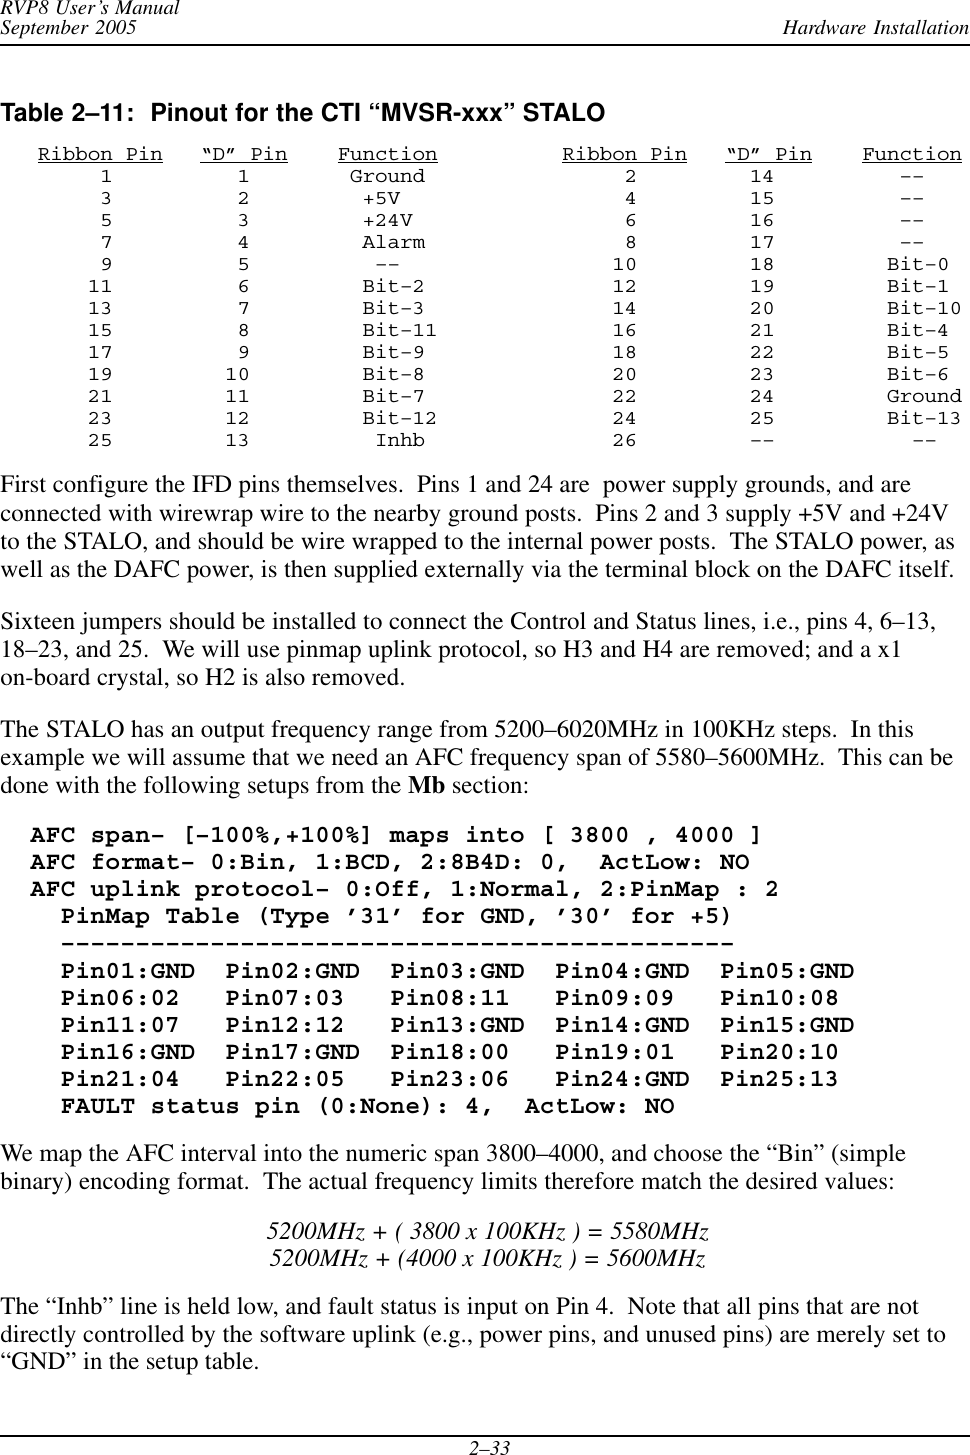 Hardware InstallationRVP8 User’s ManualSeptember 20052–33Table 2–11: Pinout for the CTI “MVSR-xxx” STALO   Ribbon Pin   “D” Pin    Function          Ribbon Pin   “D” Pin    Function        1          1        Ground                2         14          ––        3          2         +5V                  4         15          ––        5          3         +24V                 6         16          ––        7          4         Alarm                8         17          ––        9          5          ––                 10         18         Bit–0       11          6         Bit–2               12         19         Bit–1       13          7         Bit–3               14         20         Bit–10       15          8         Bit–11              16         21         Bit–4       17          9         Bit–9               18         22         Bit–5       19         10         Bit–8               20         23         Bit–6       21         11         Bit–7               22         24         Ground       23         12         Bit–12              24         25         Bit–13       25         13          Inhb               26         ––           ––First configure the IFD pins themselves.  Pins 1 and 24 are  power supply grounds, and areconnected with wirewrap wire to the nearby ground posts.  Pins 2 and 3 supply +5V and +24Vto the STALO, and should be wire wrapped to the internal power posts.  The STALO power, aswell as the DAFC power, is then supplied externally via the terminal block on the DAFC itself.Sixteen jumpers should be installed to connect the Control and Status lines, i.e., pins 4, 6–13,18–23, and 25.  We will use pinmap uplink protocol, so H3 and H4 are removed; and a x1on-board crystal, so H2 is also removed.The STALO has an output frequency range from 5200–6020MHz in 100KHz steps.  In thisexample we will assume that we need an AFC frequency span of 5580–5600MHz.  This can bedone with the following setups from the Mb section:  AFC span– [–100%,+100%] maps into [ 3800 , 4000 ]  AFC format– 0:Bin, 1:BCD, 2:8B4D: 0,  ActLow: NO  AFC uplink protocol– 0:Off, 1:Normal, 2:PinMap : 2    PinMap Table (Type ’31’ for GND, ’30’ for +5)    –––––––––––––––––––––––––––––––––––––––––––––    Pin01:GND  Pin02:GND  Pin03:GND  Pin04:GND  Pin05:GND    Pin06:02   Pin07:03   Pin08:11   Pin09:09   Pin10:08    Pin11:07   Pin12:12   Pin13:GND  Pin14:GND  Pin15:GND    Pin16:GND  Pin17:GND  Pin18:00   Pin19:01   Pin20:10    Pin21:04   Pin22:05   Pin23:06   Pin24:GND  Pin25:13    FAULT status pin (0:None): 4,  ActLow: NOWe map the AFC interval into the numeric span 3800–4000, and choose the “Bin” (simplebinary) encoding format.  The actual frequency limits therefore match the desired values:5200MHz + ( 3800 x 100KHz ) = 5580MHz5200MHz + (4000 x 100KHz ) = 5600MHzThe “Inhb” line is held low, and fault status is input on Pin 4.  Note that all pins that are notdirectly controlled by the software uplink (e.g., power pins, and unused pins) are merely set to“GND” in the setup table.